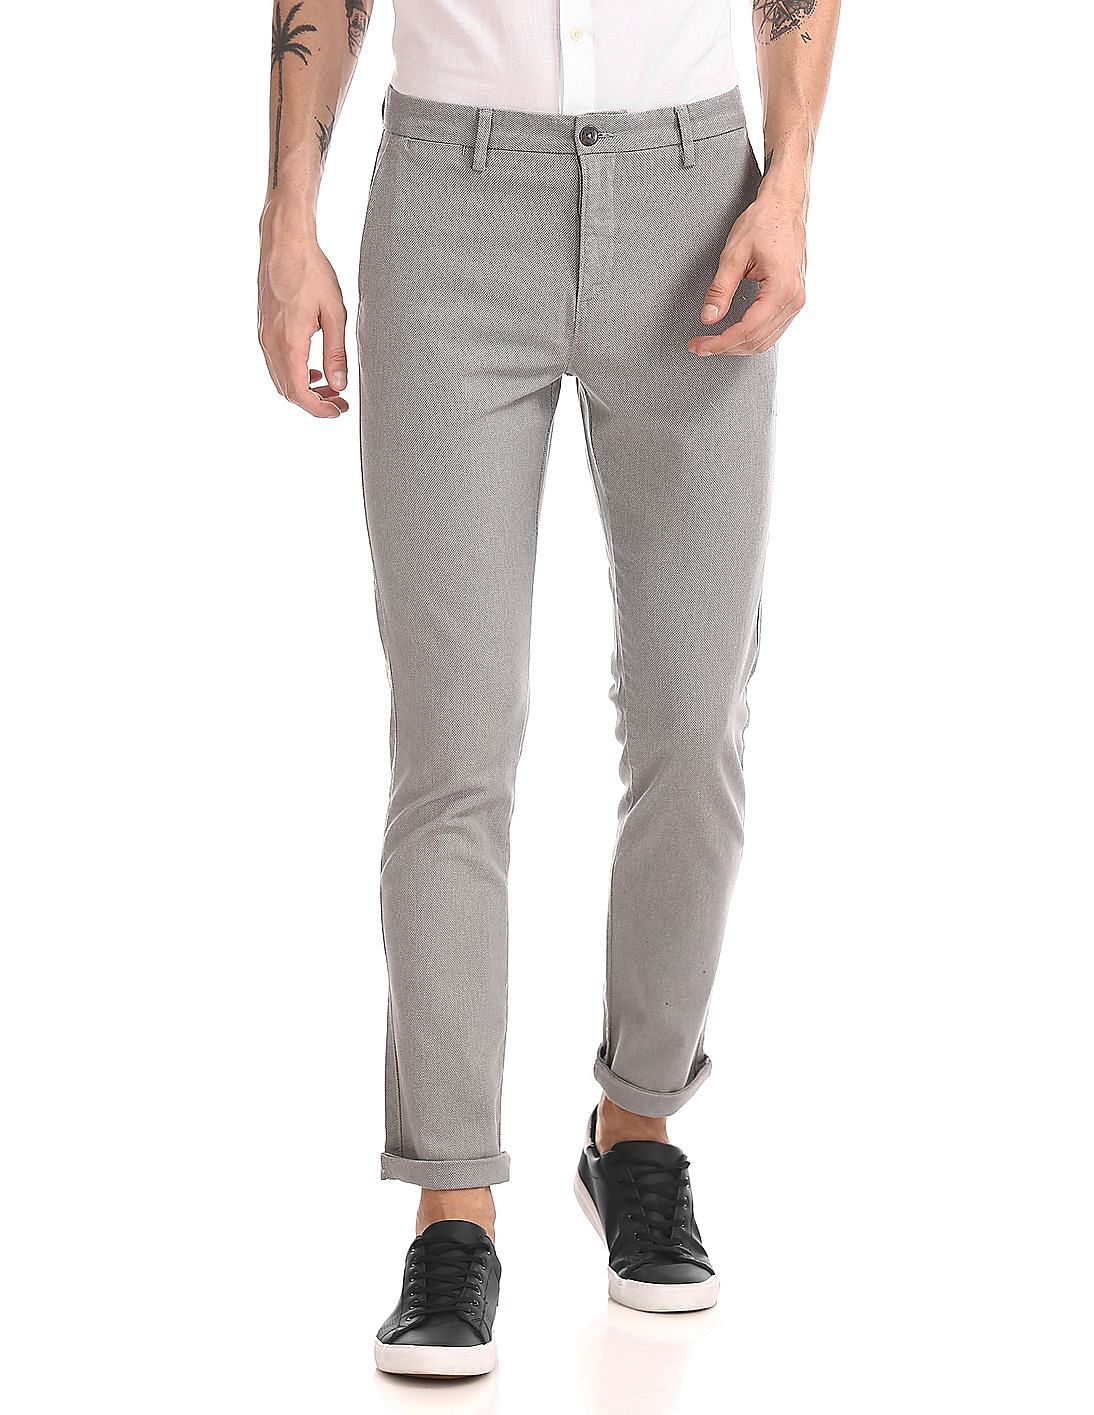 Buy U.S. Polo Assn. Denver Slim Fit Patterned Trousers - NNNOW.com